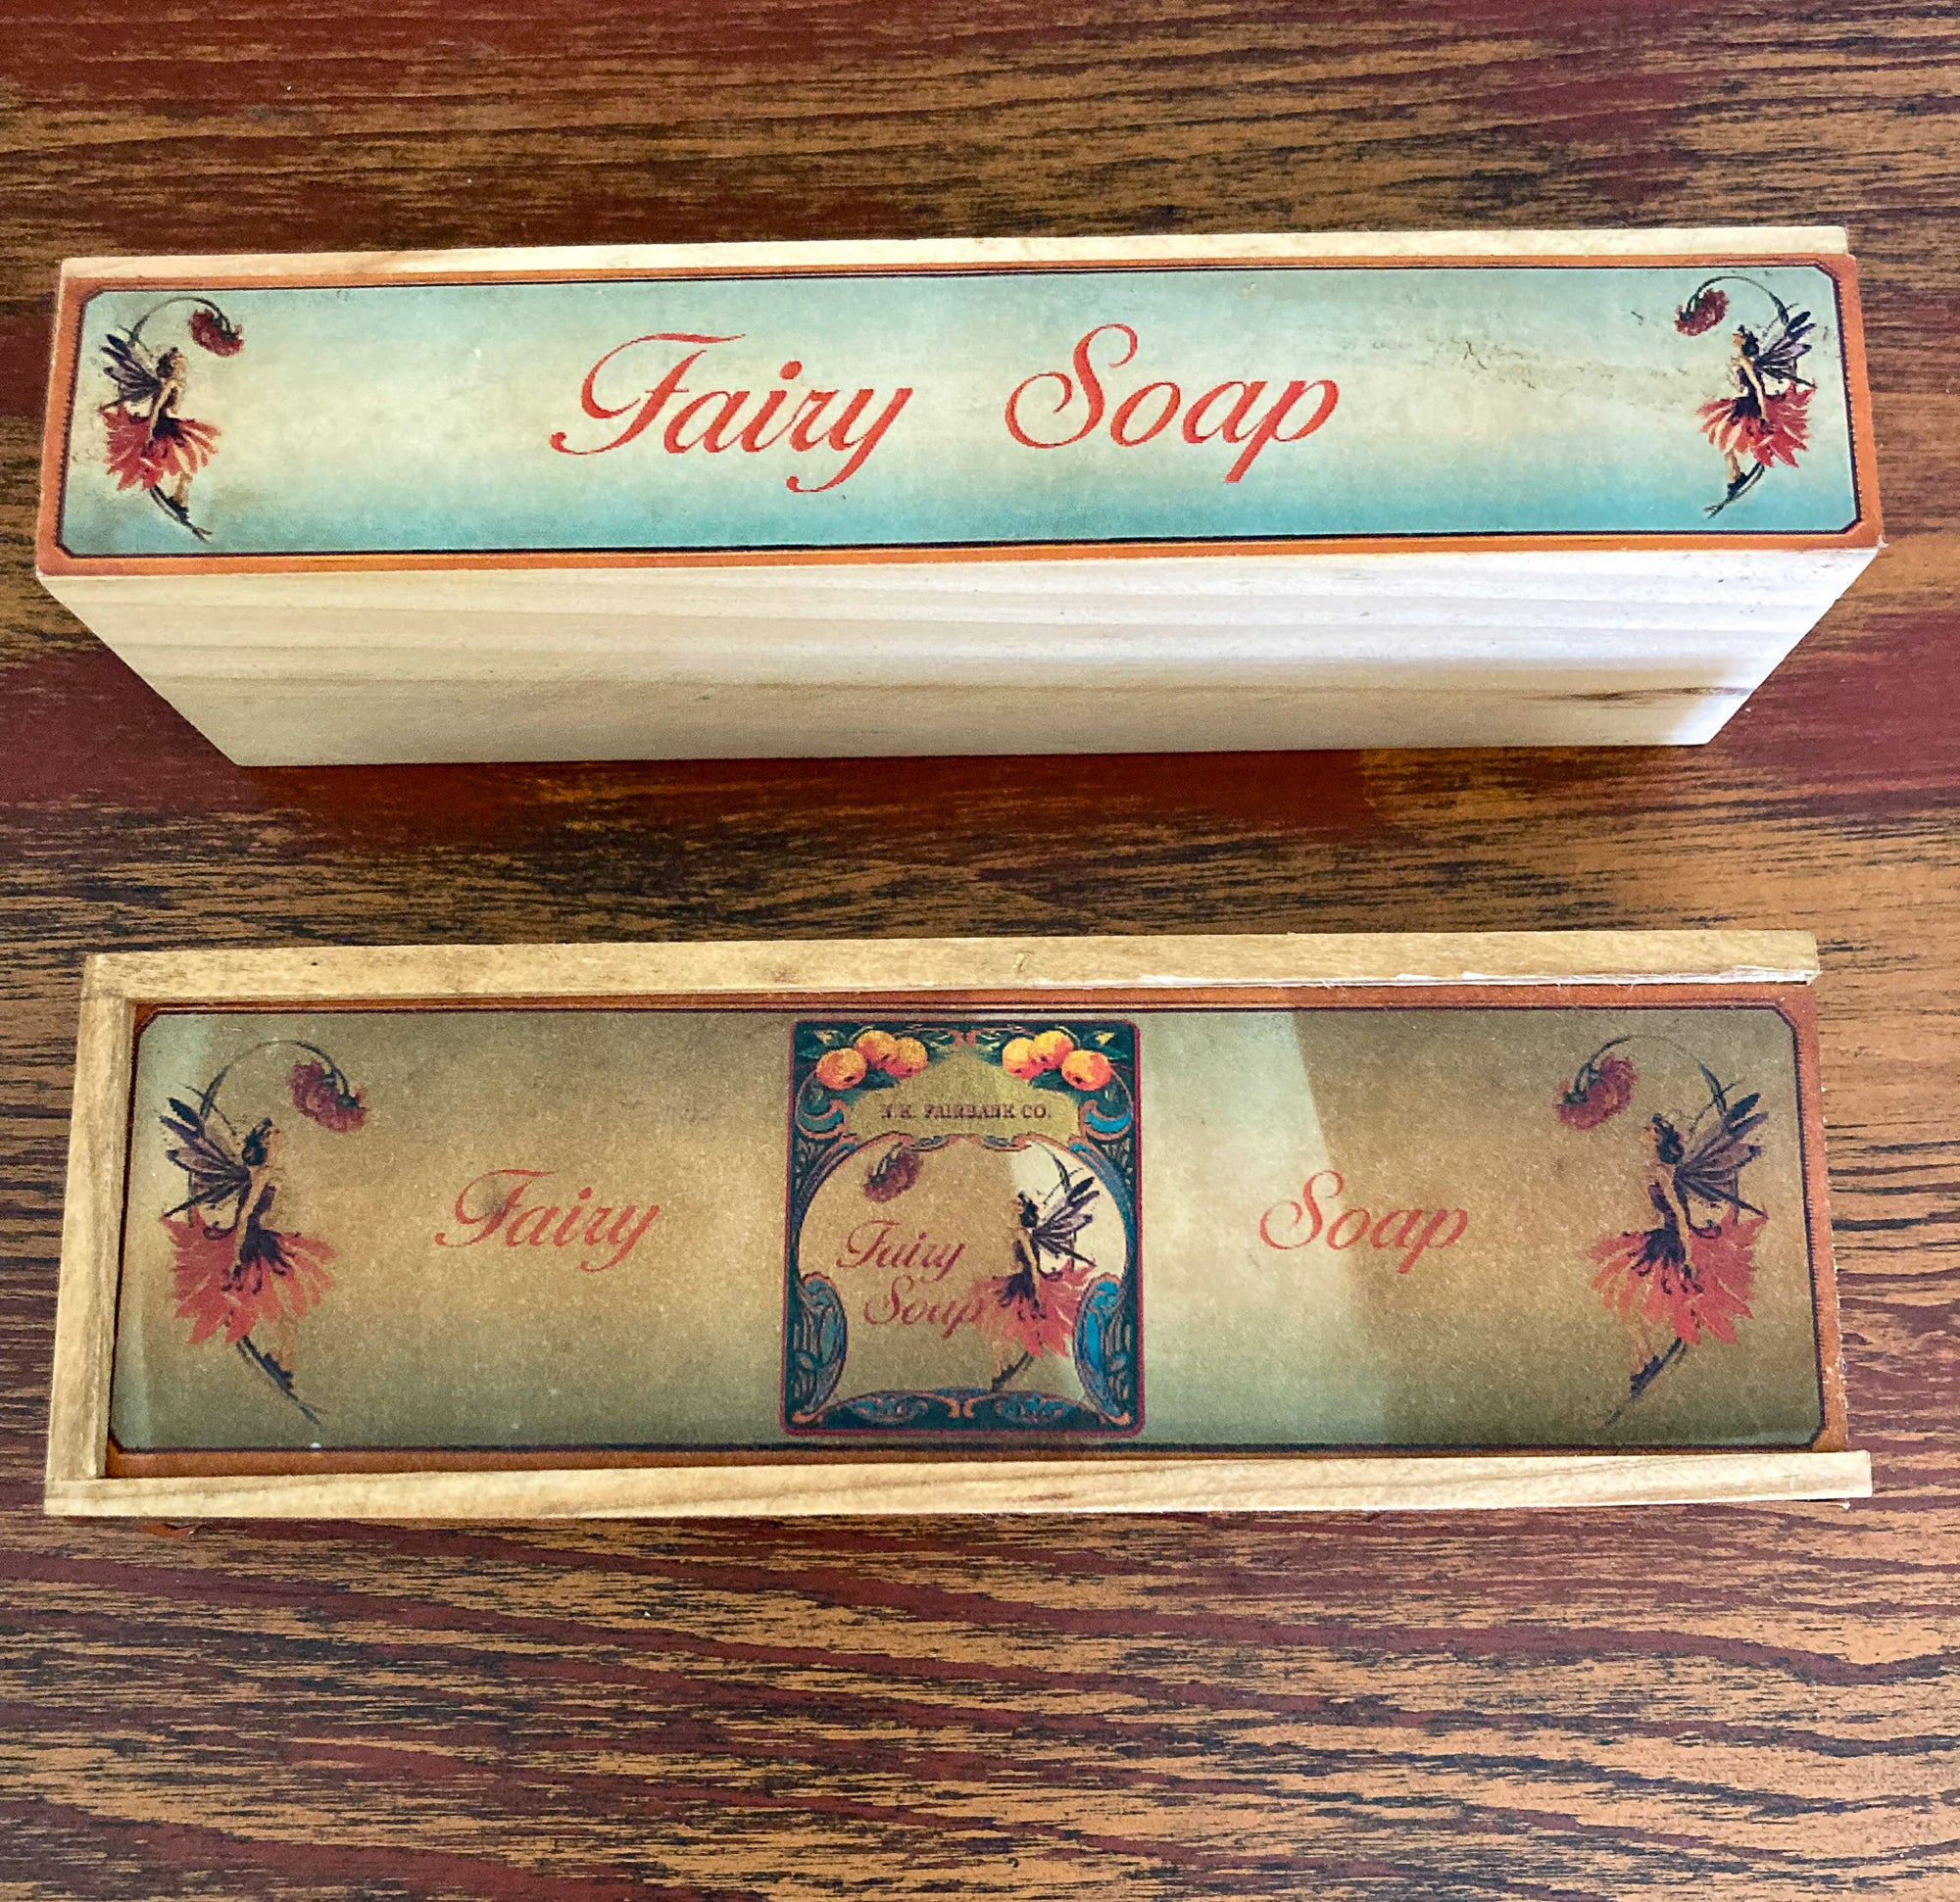 1910’s -1920’s Wooden Fairy Soap Boxes, Set of 15